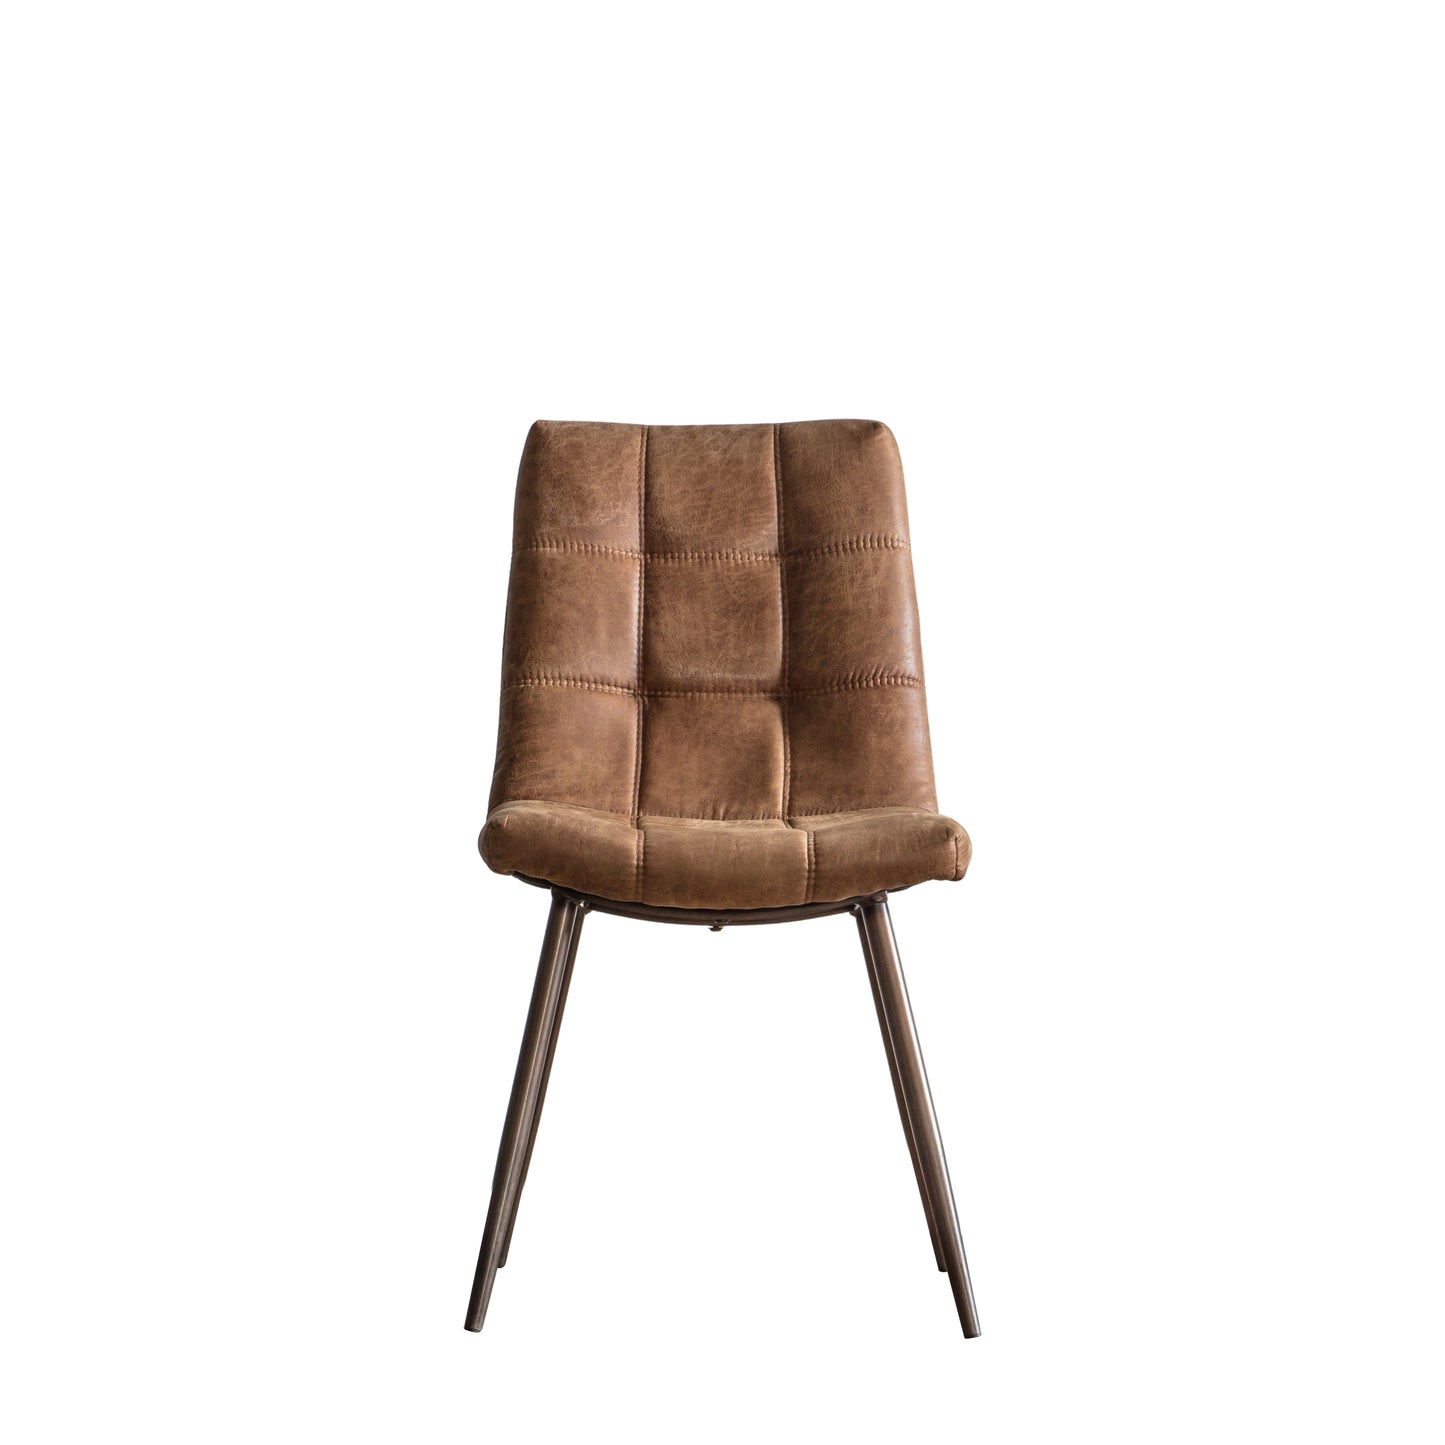 A Darwin Brown Chair (2pk) by Kikiathome.co.uk for home furniture and interior decor.